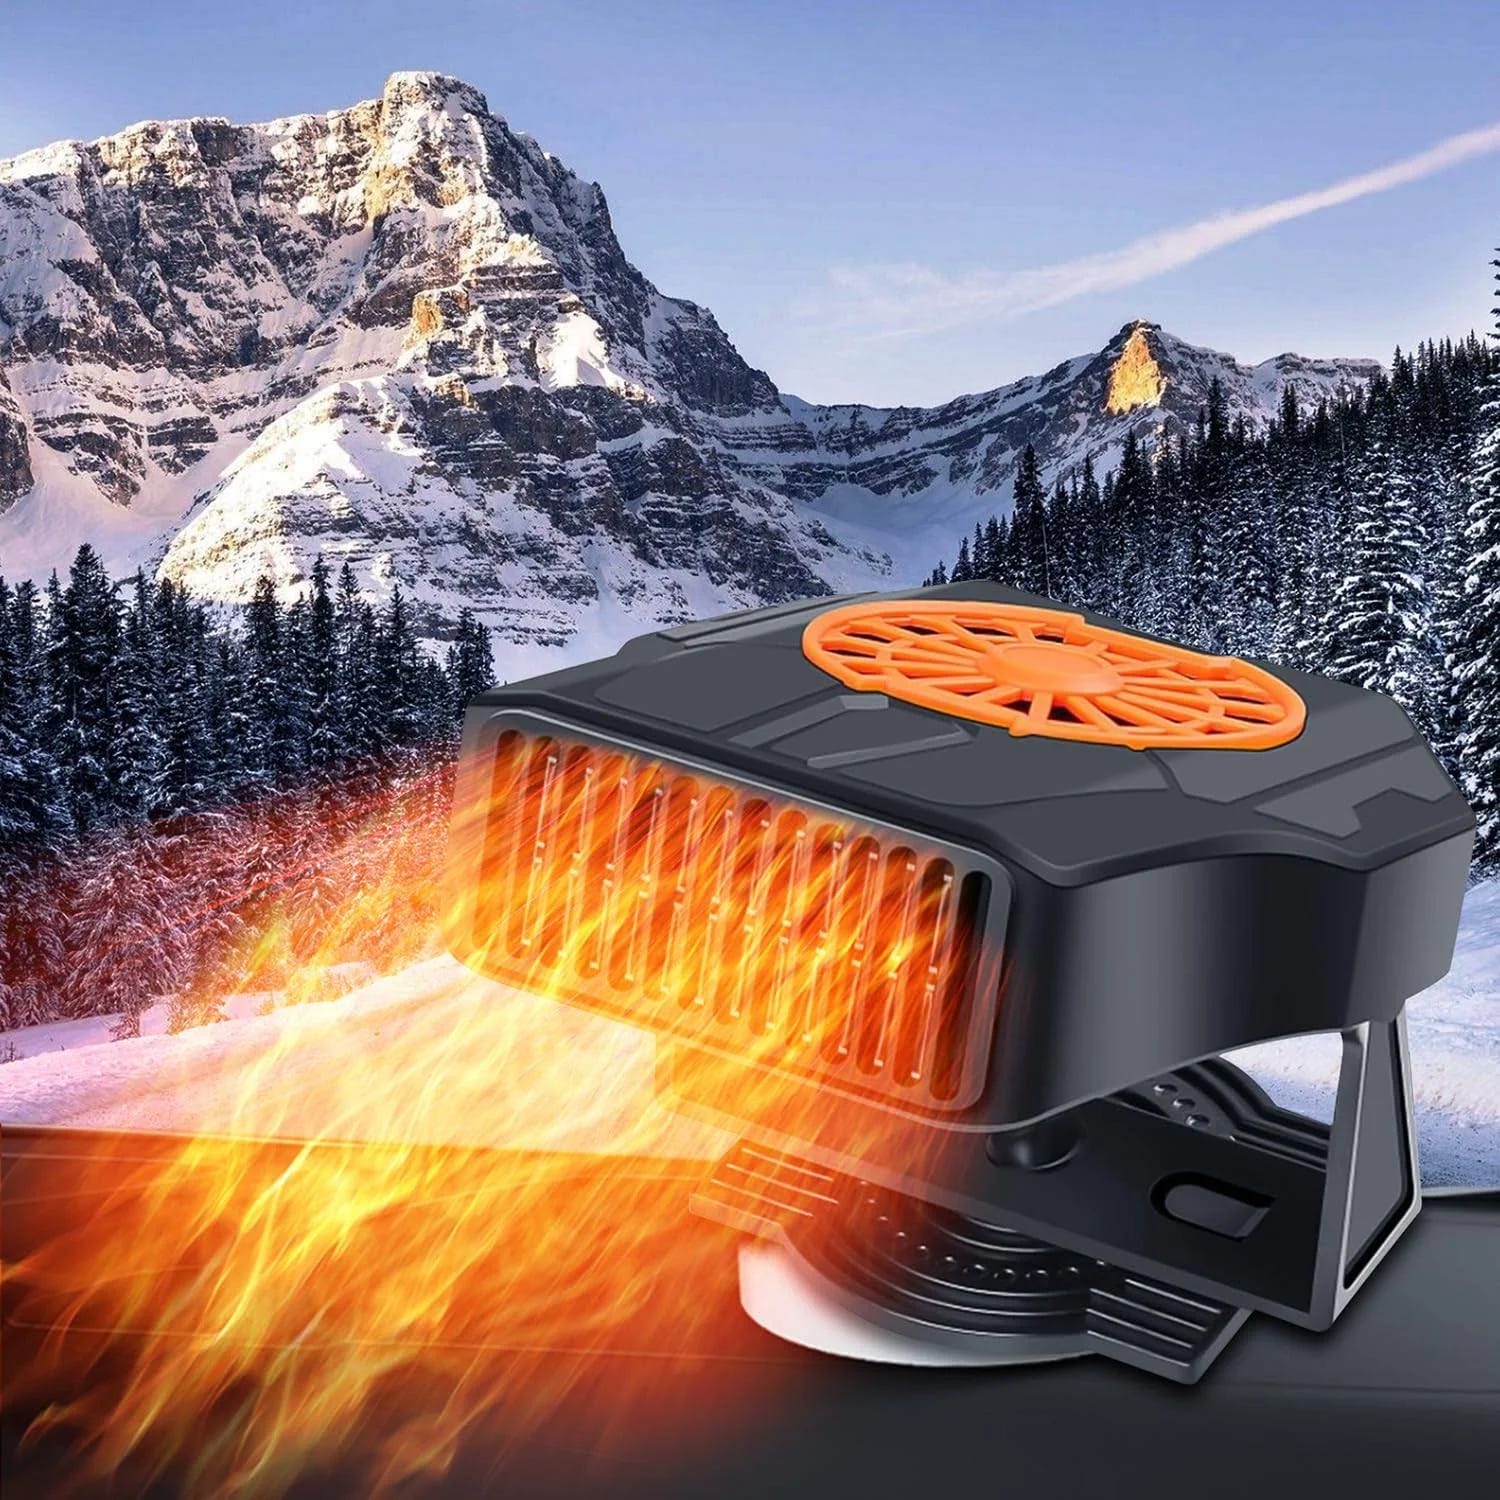 Portable Automobile Heater for Rapid Car Heating | Image